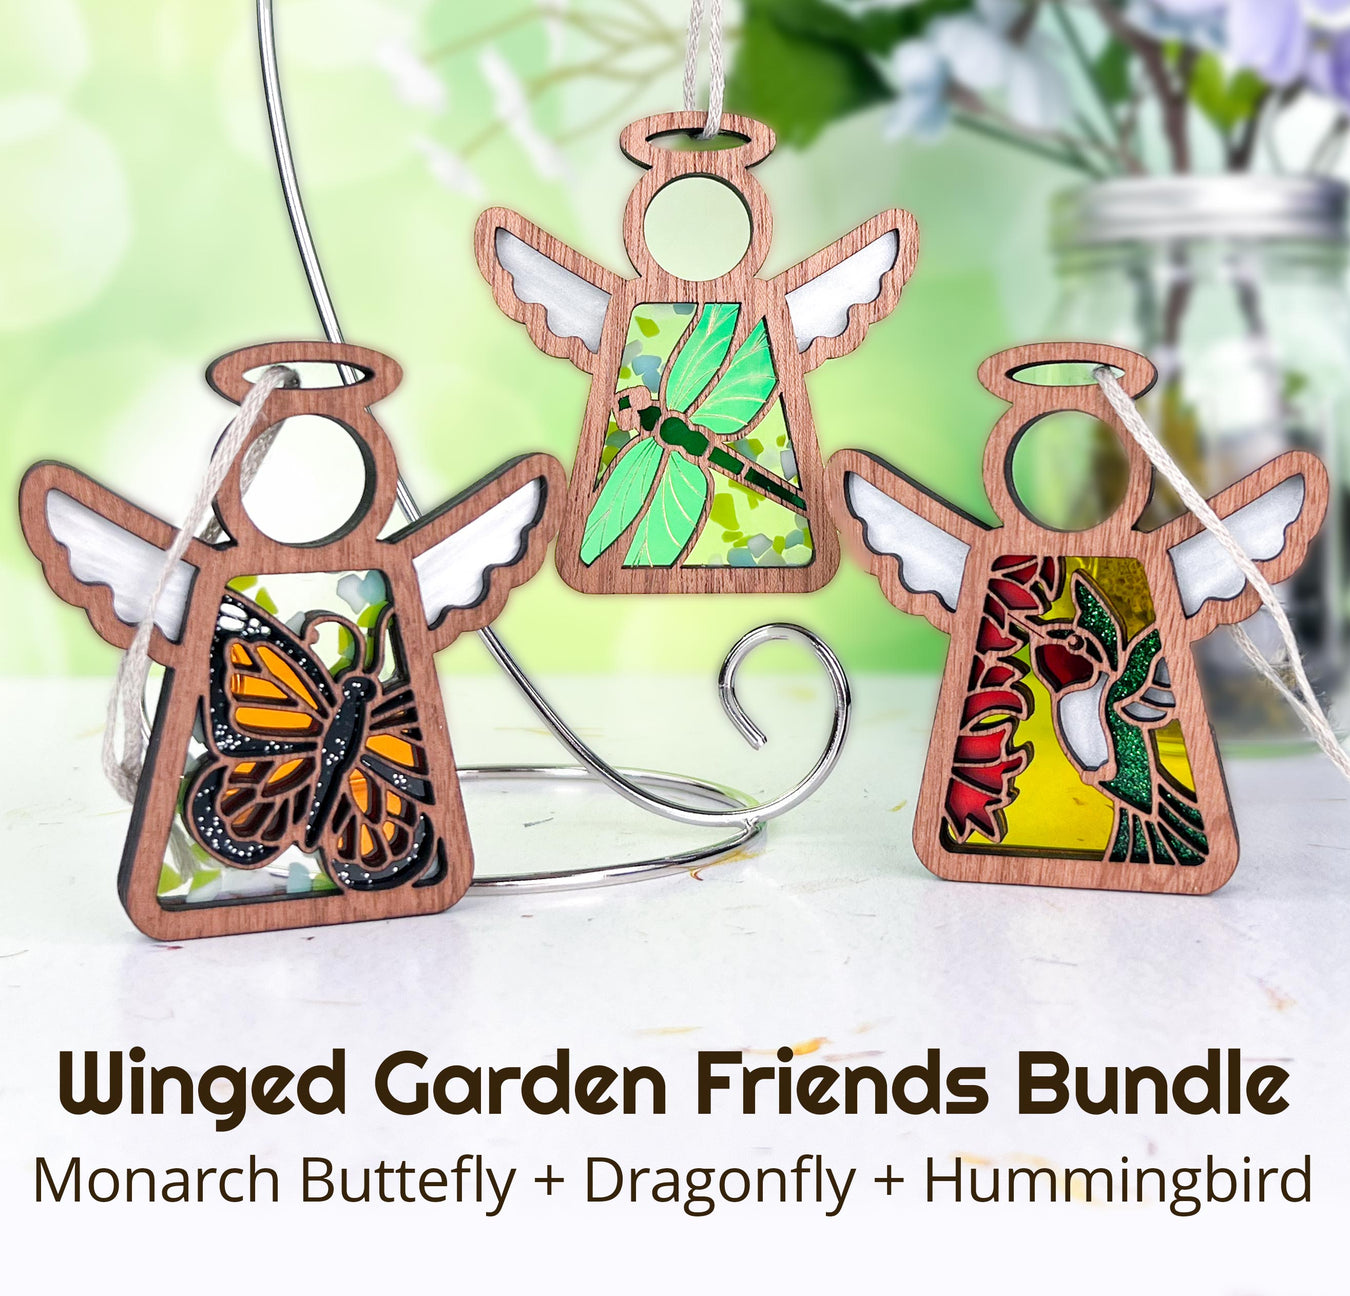 Winged Garden Friends Bundle - Monarch Butterfly, Dragonfly and Hummingbird Mother’s Angels are included.